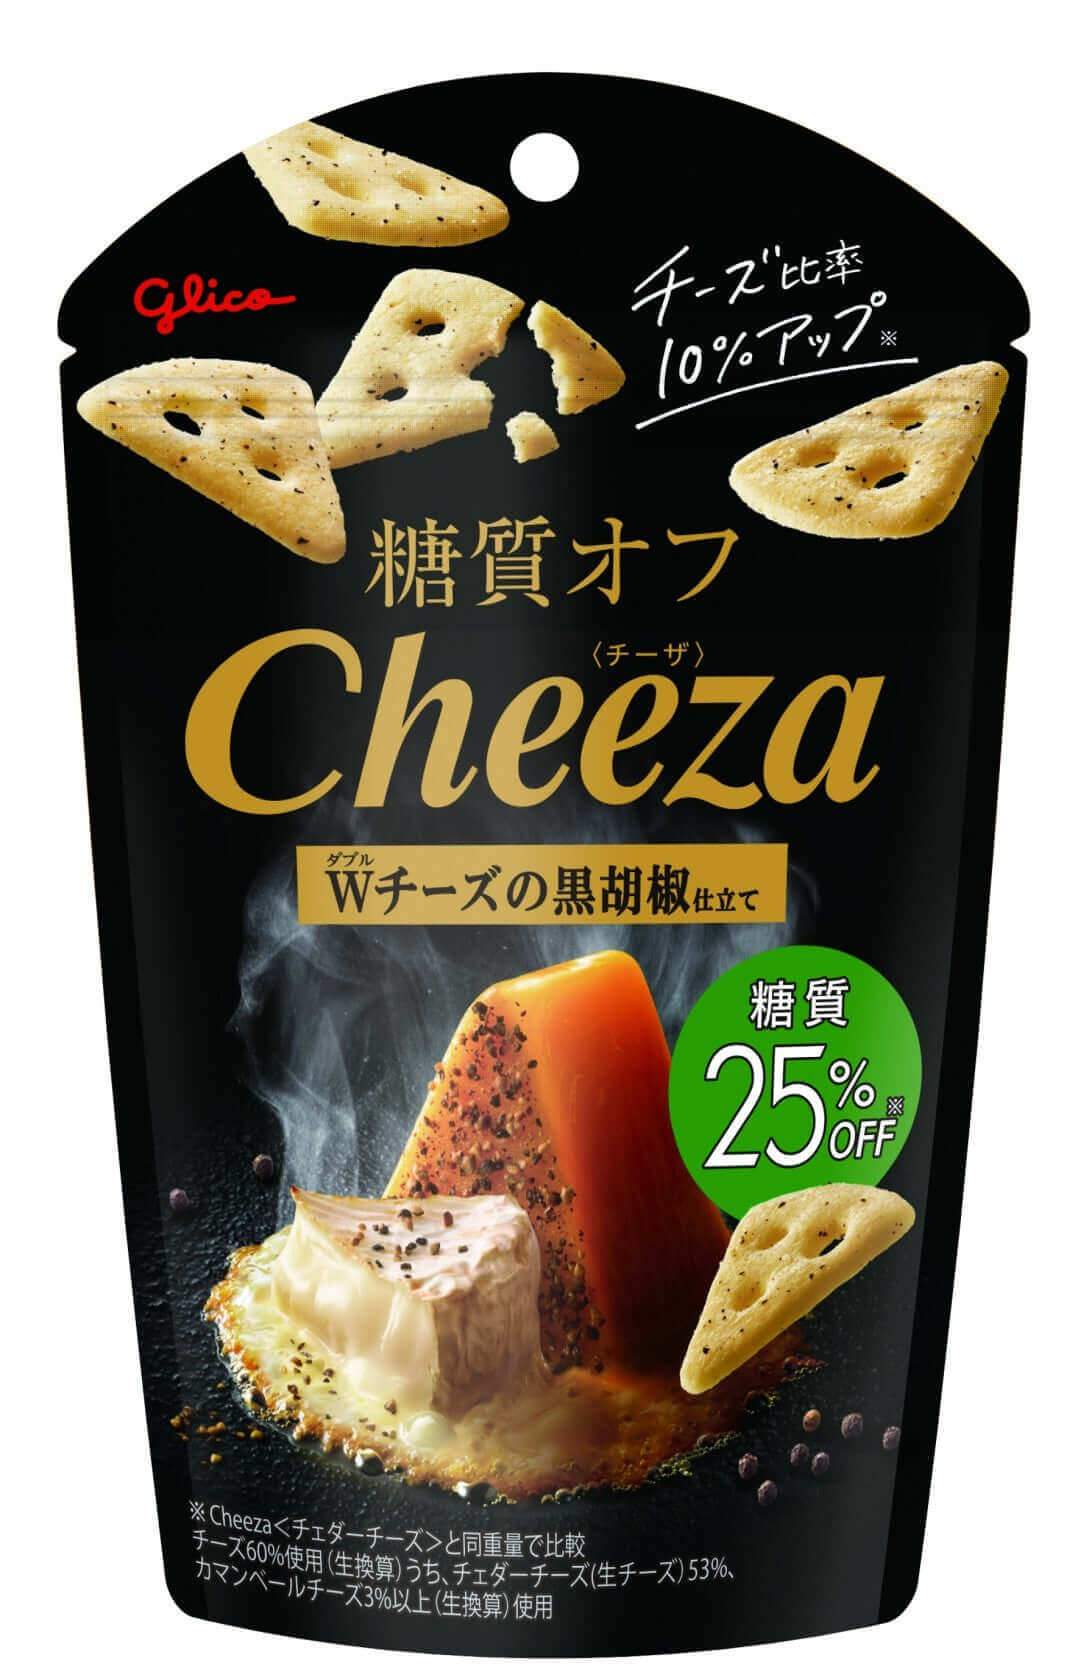 Glico Cheeza Crackers - Double Cheese Black Pepper Cheddar & Camembert